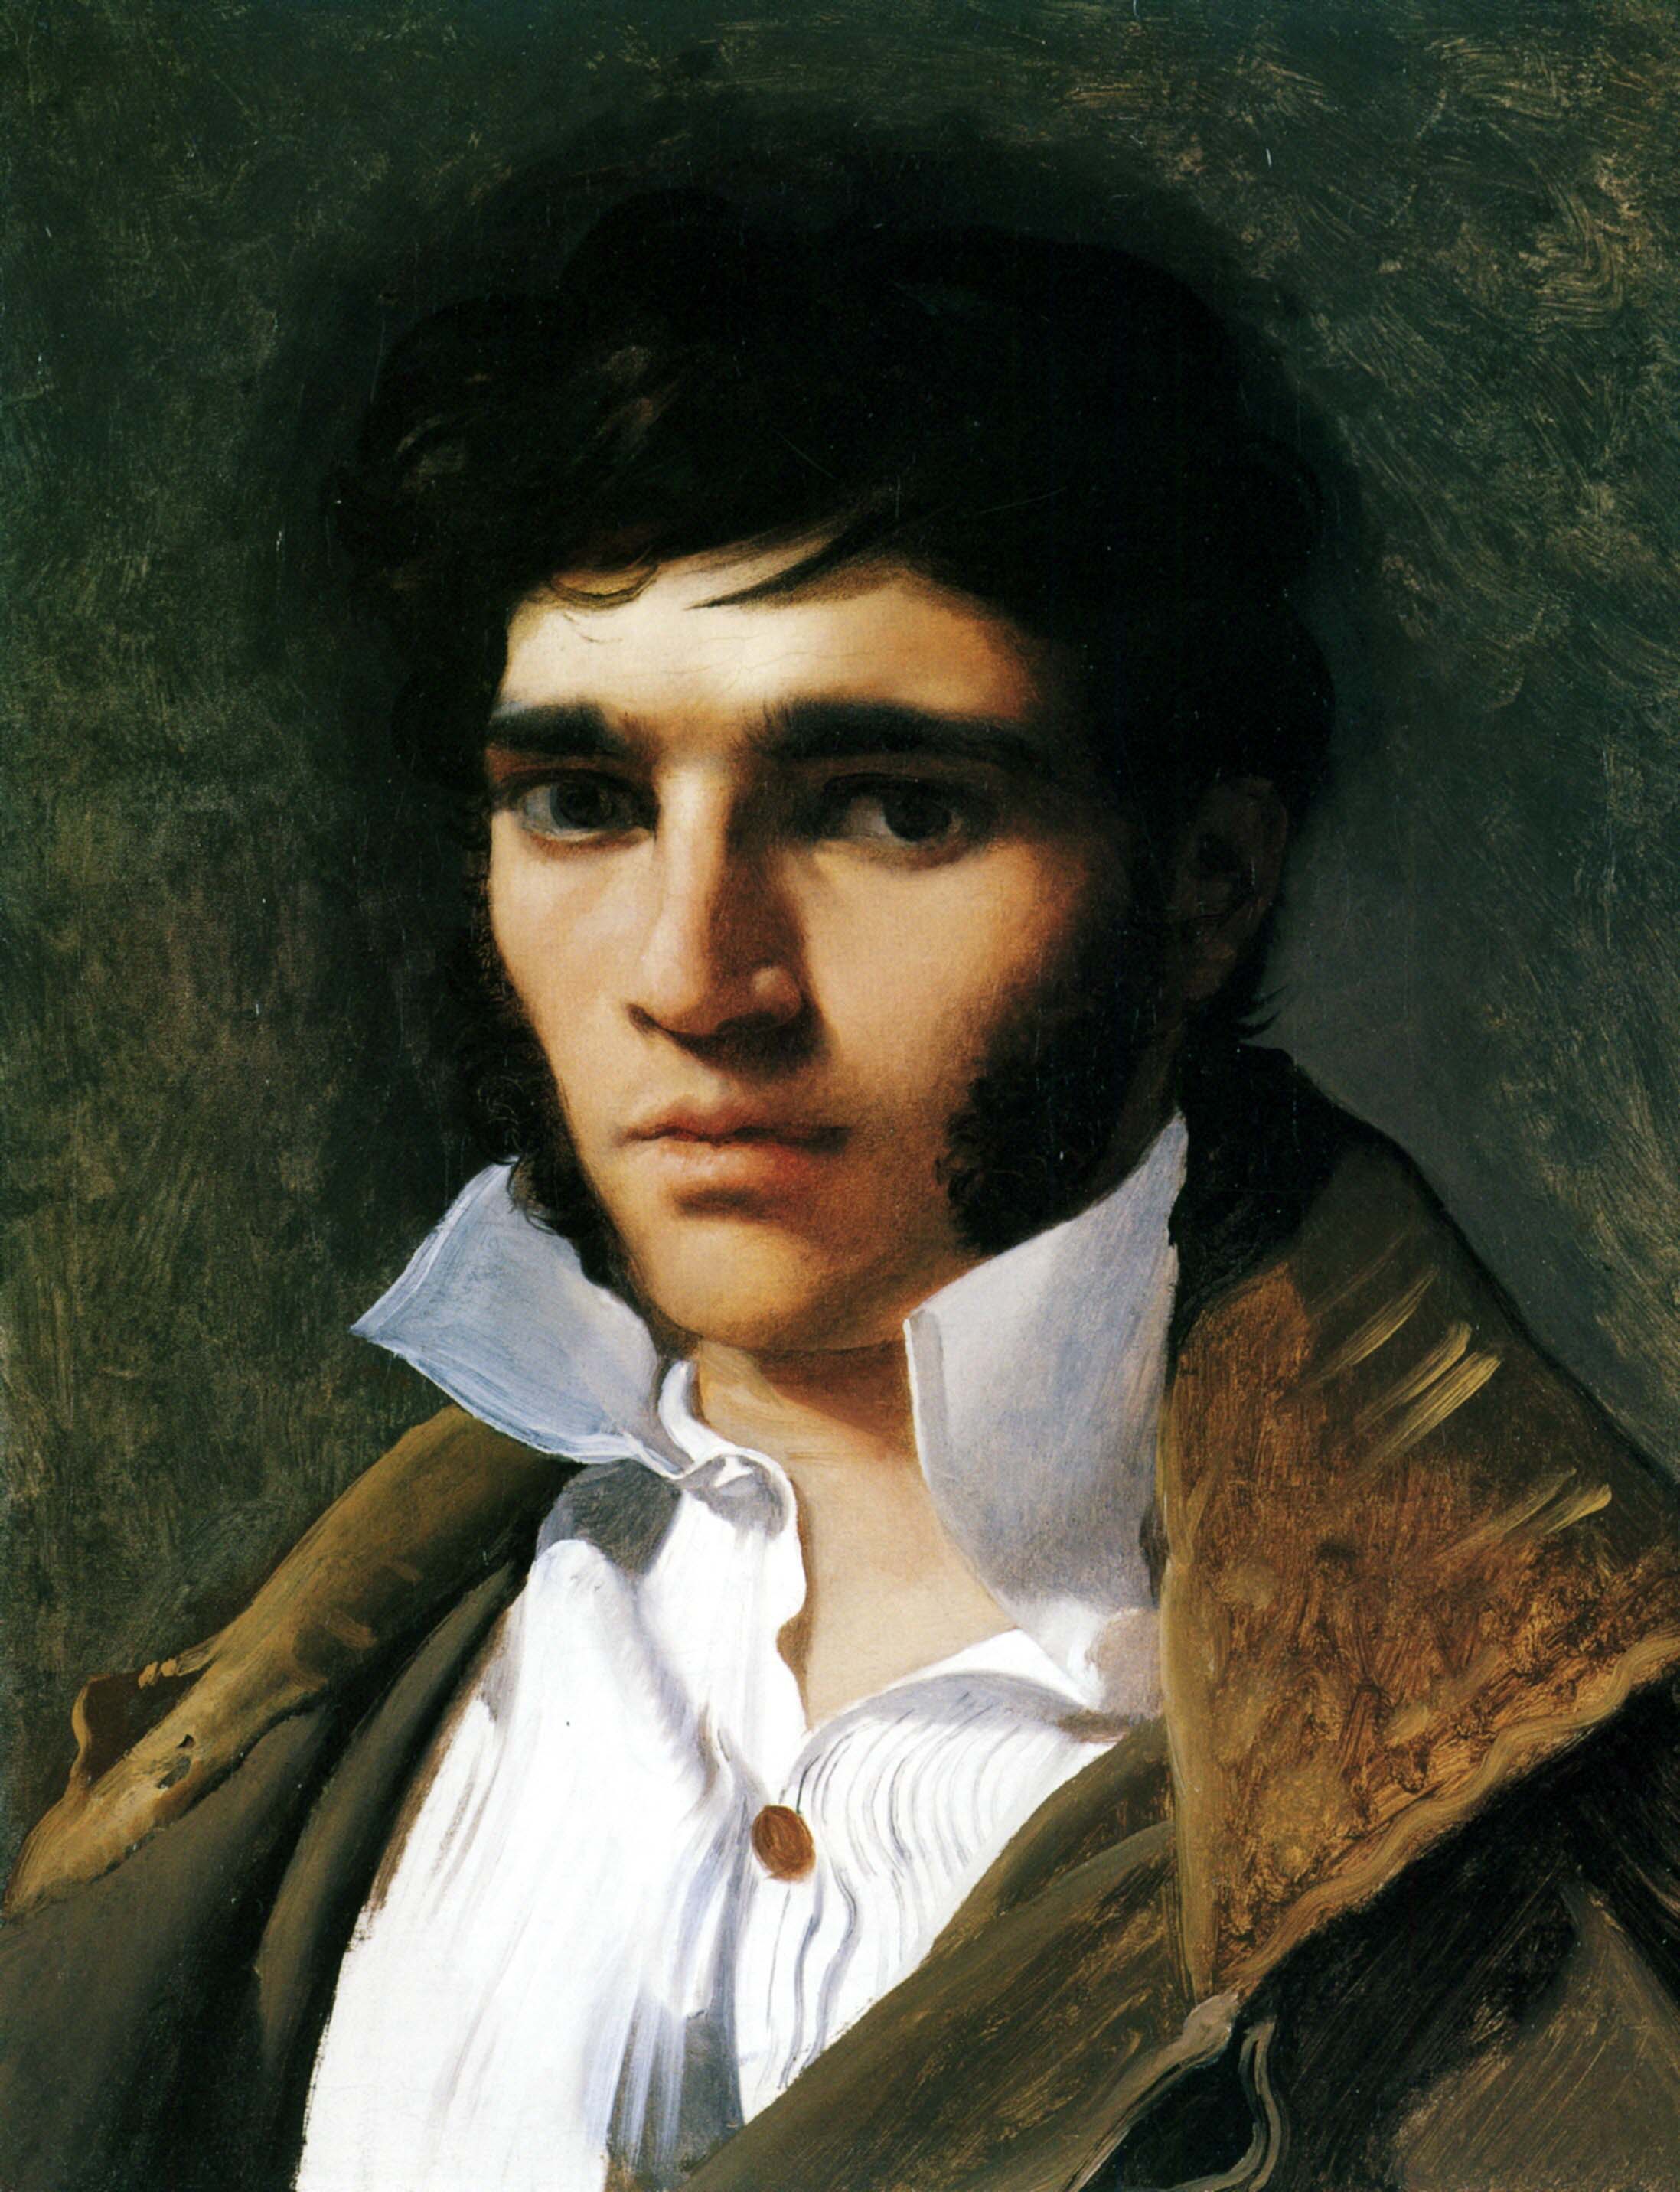 Paul Lemoyne by Jean-Auguste-Dominique Ingres - 1810 - 46 x 35 cm private collection